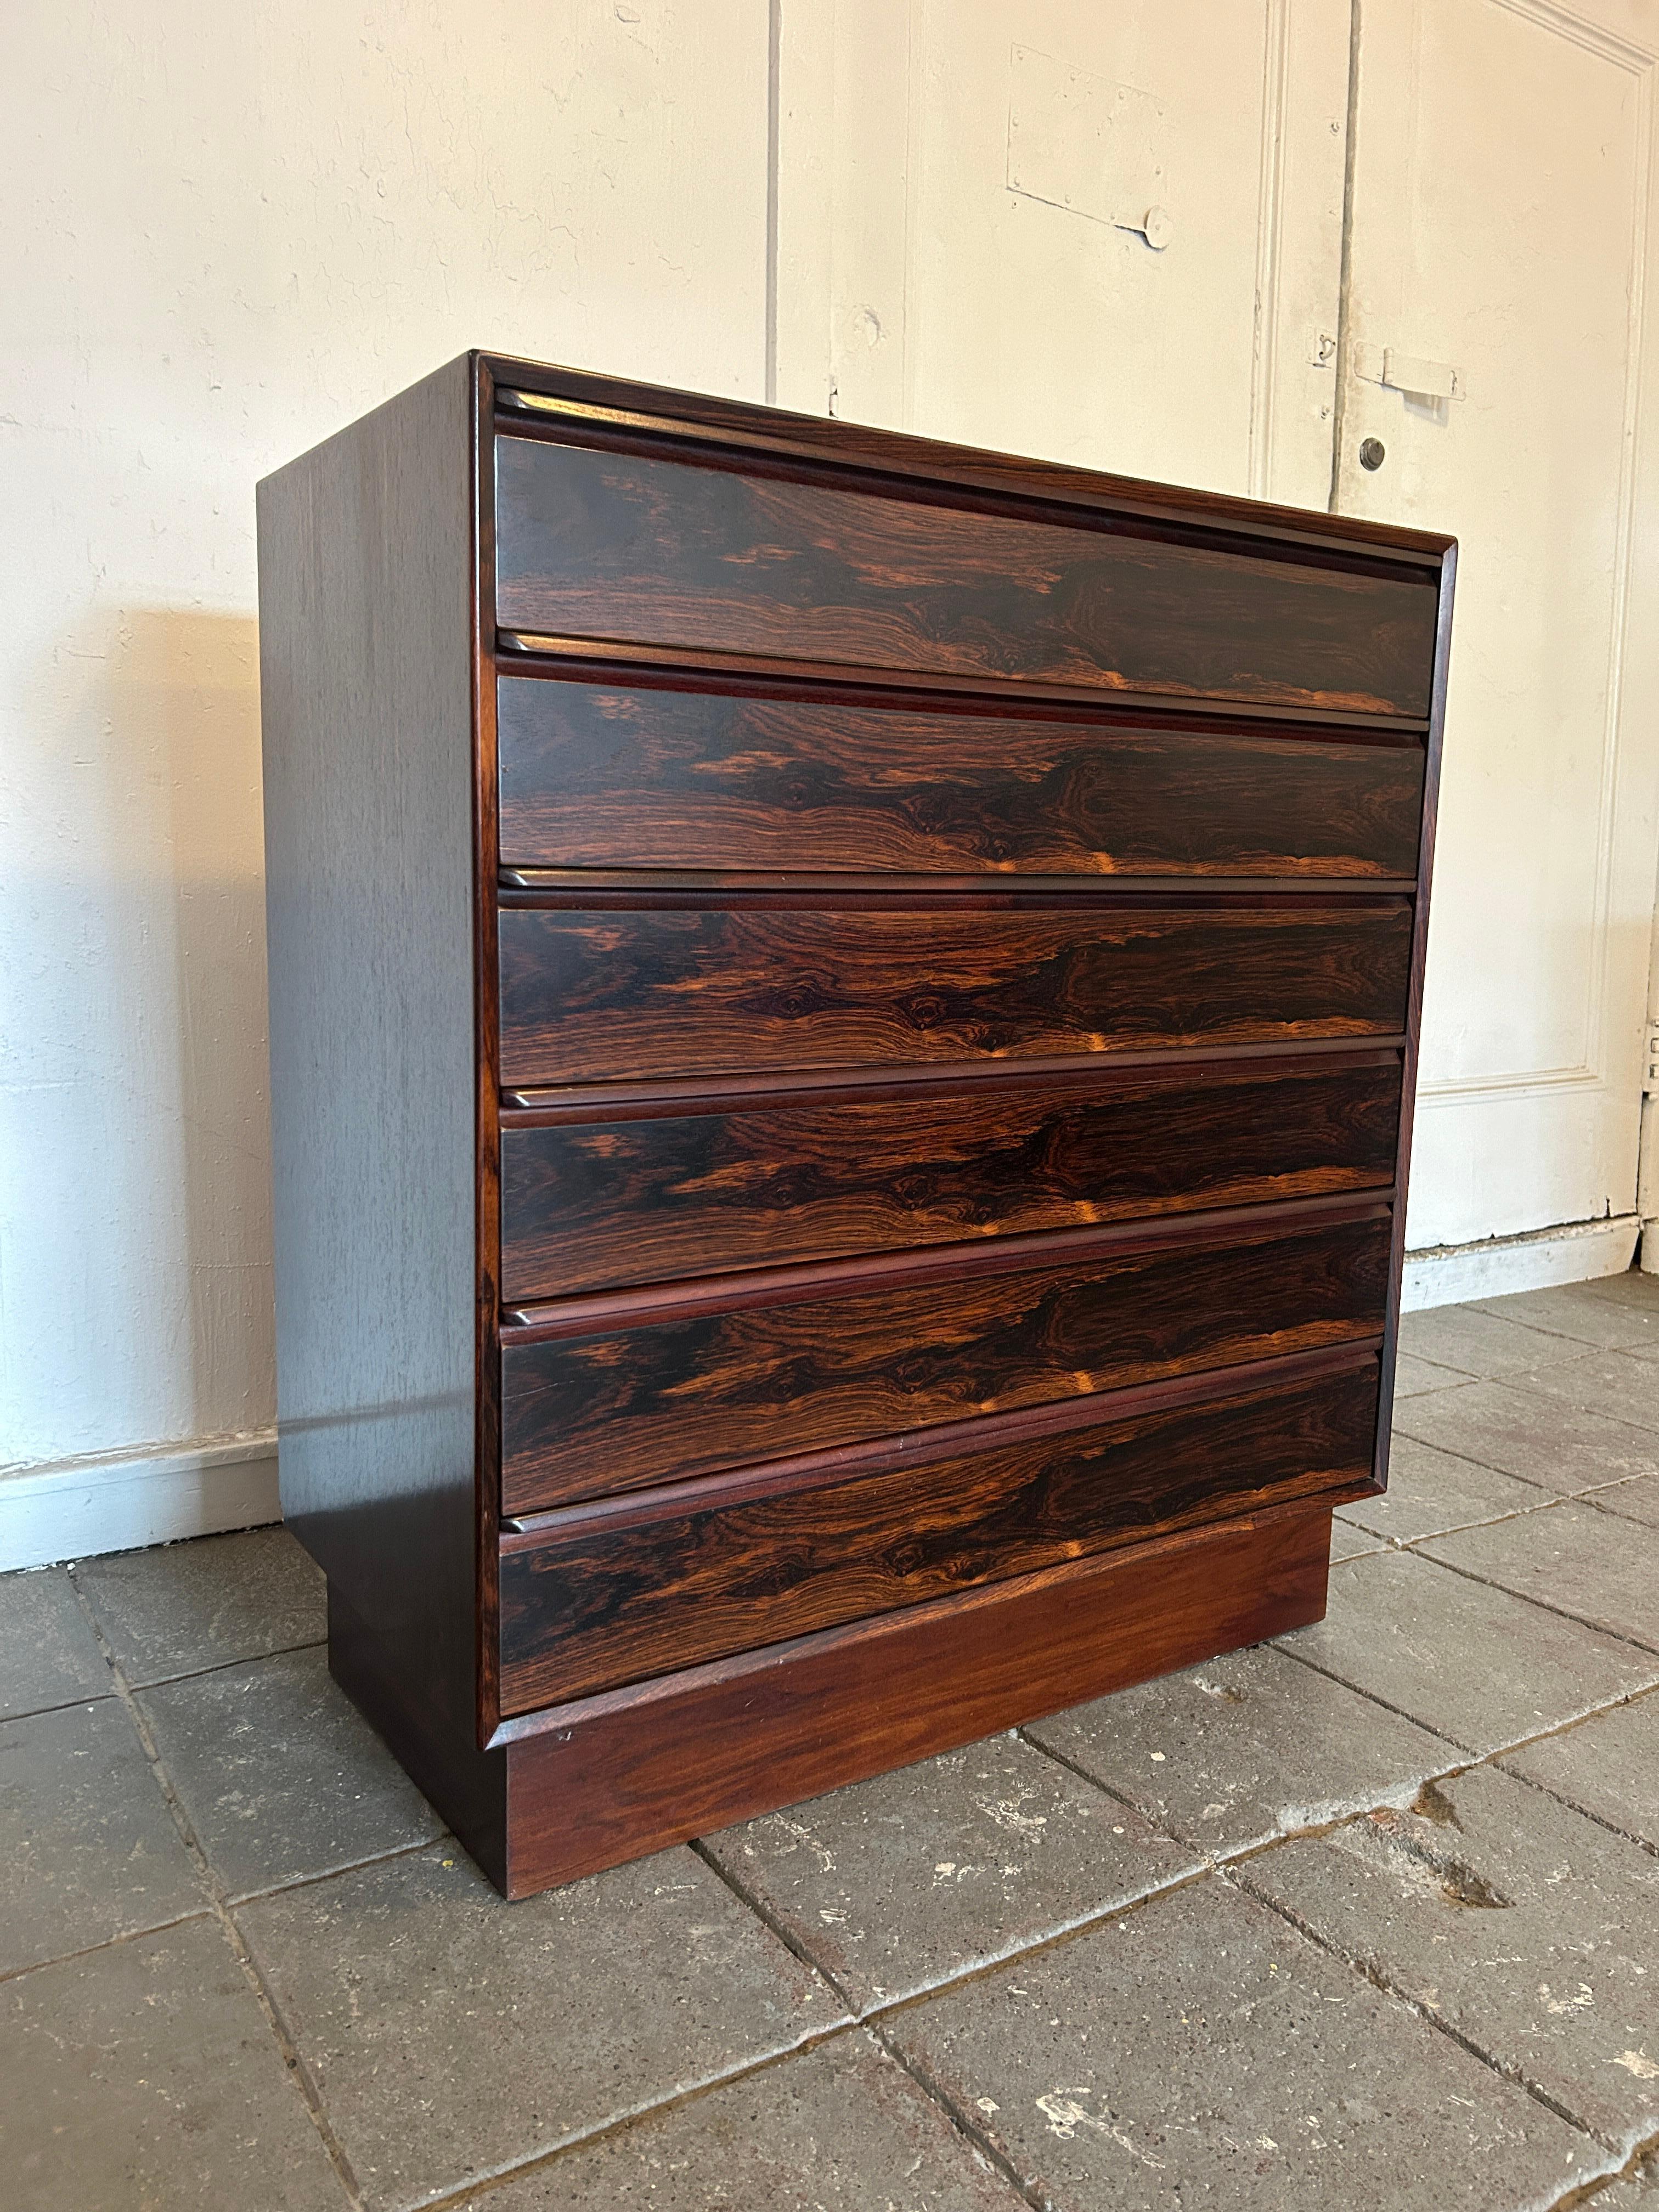 Beautiful Mid-Century Norwegian modern tall rosewood 6-drawer dresser by Westnofa. Great design and great vintage condition - clean inside and out. Drawers slide smooth with dovetail construction and carved handles. Stunning Wood grain. Shows very